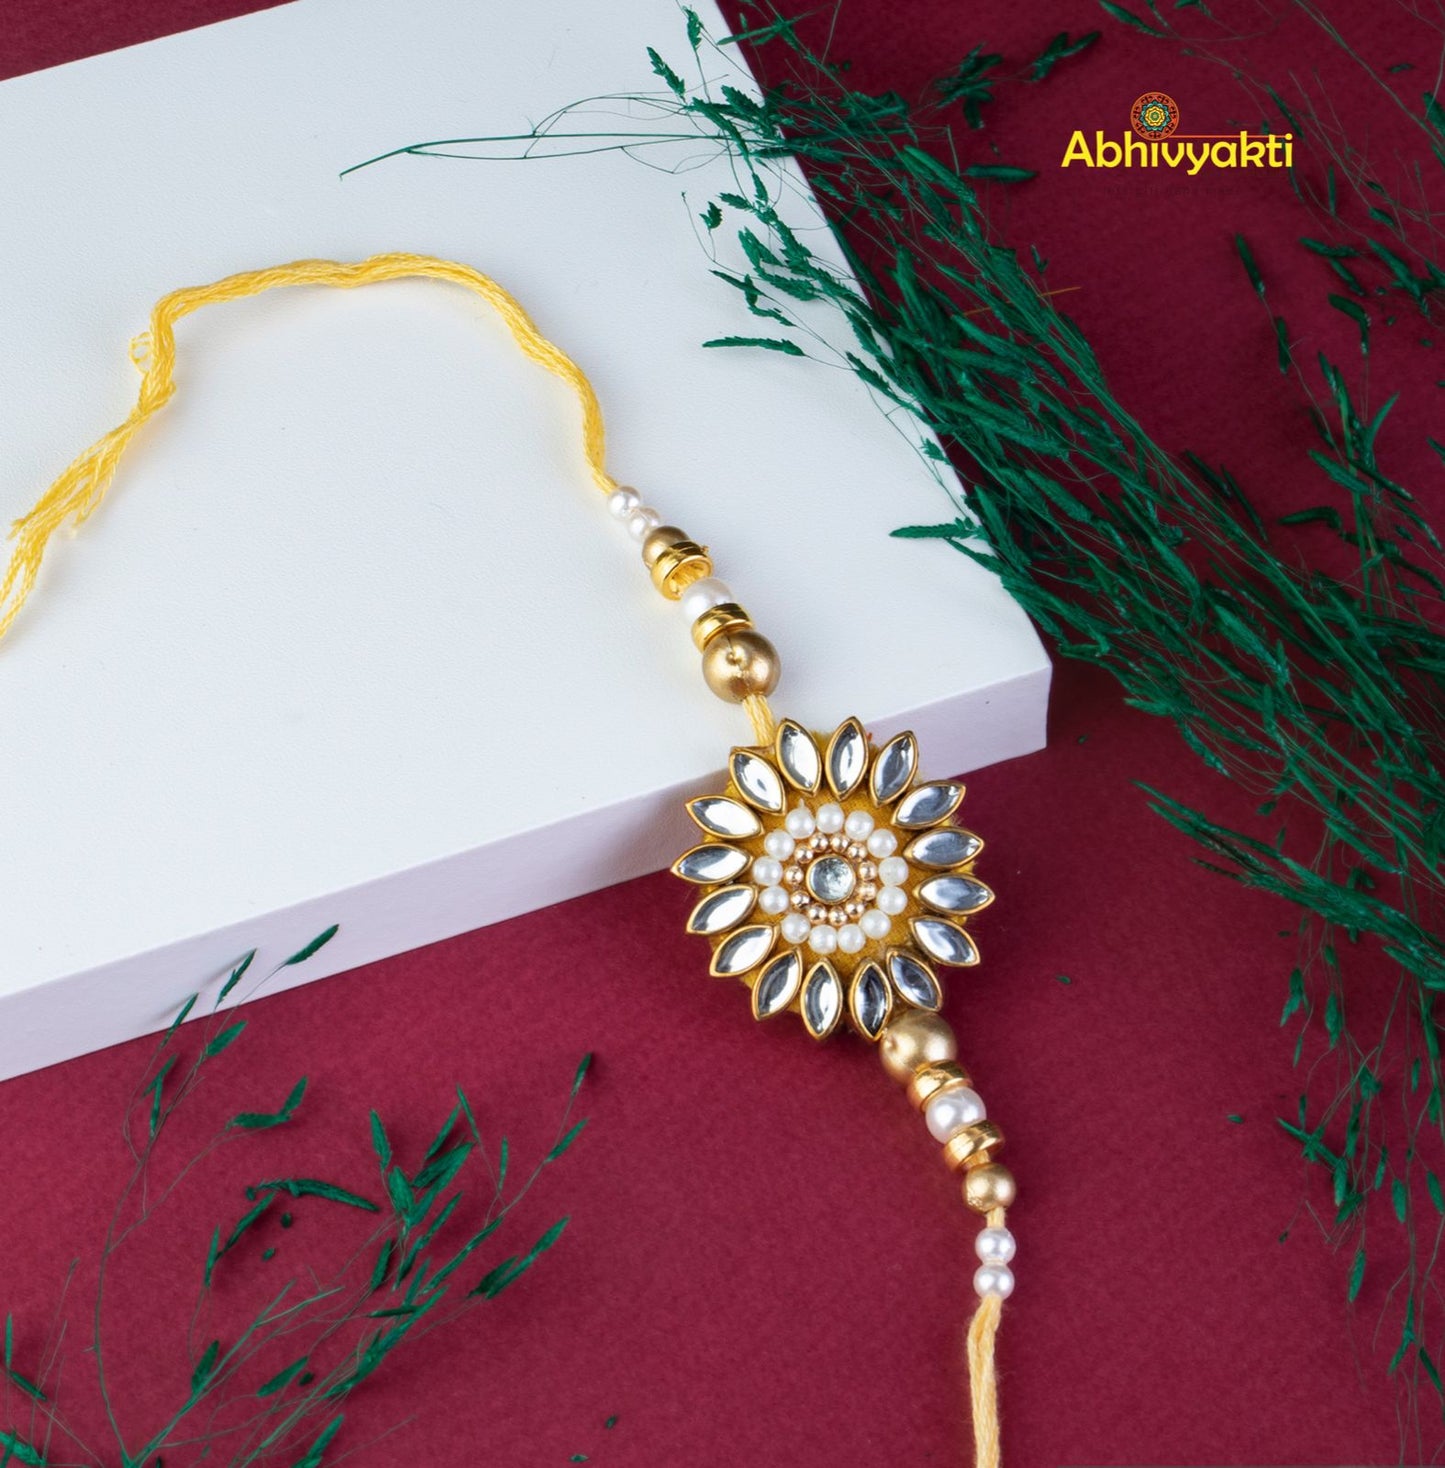 A gold and white rakhi with a flower, adorned with kundan stones and beautiful beads.